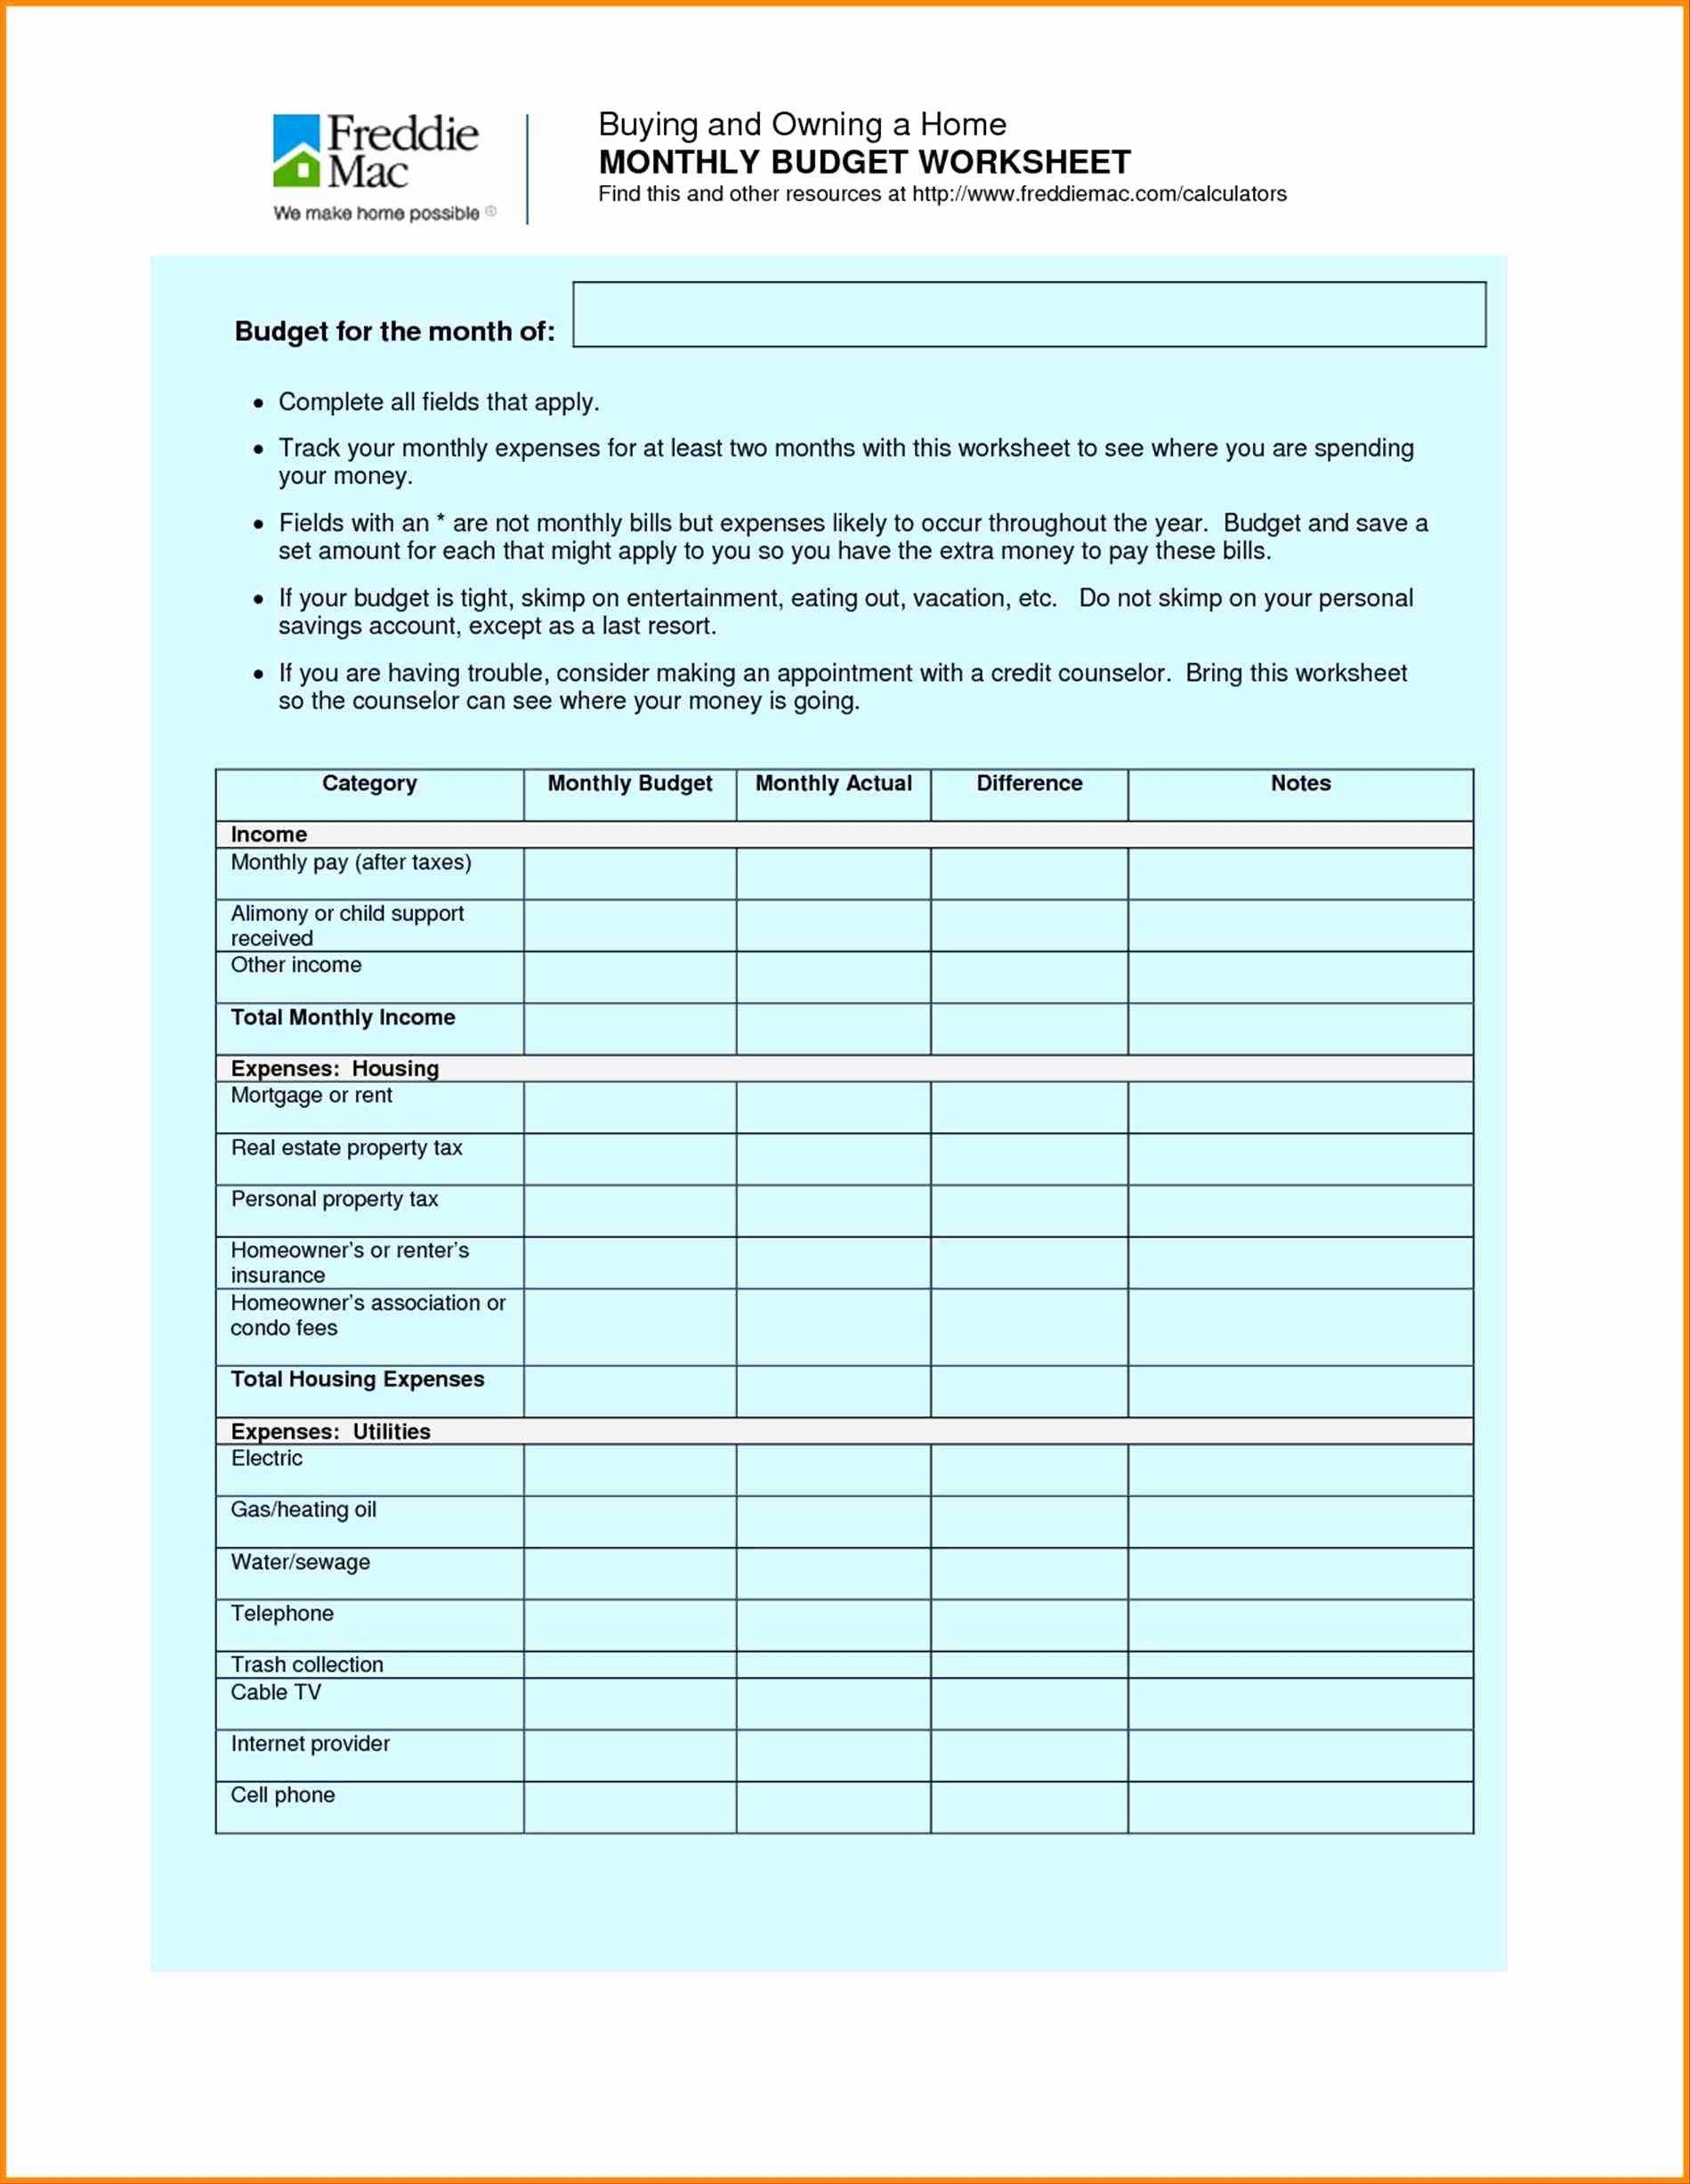 Budget Worksheet Pdf together with Unique Google Docs Monthly Bud Template